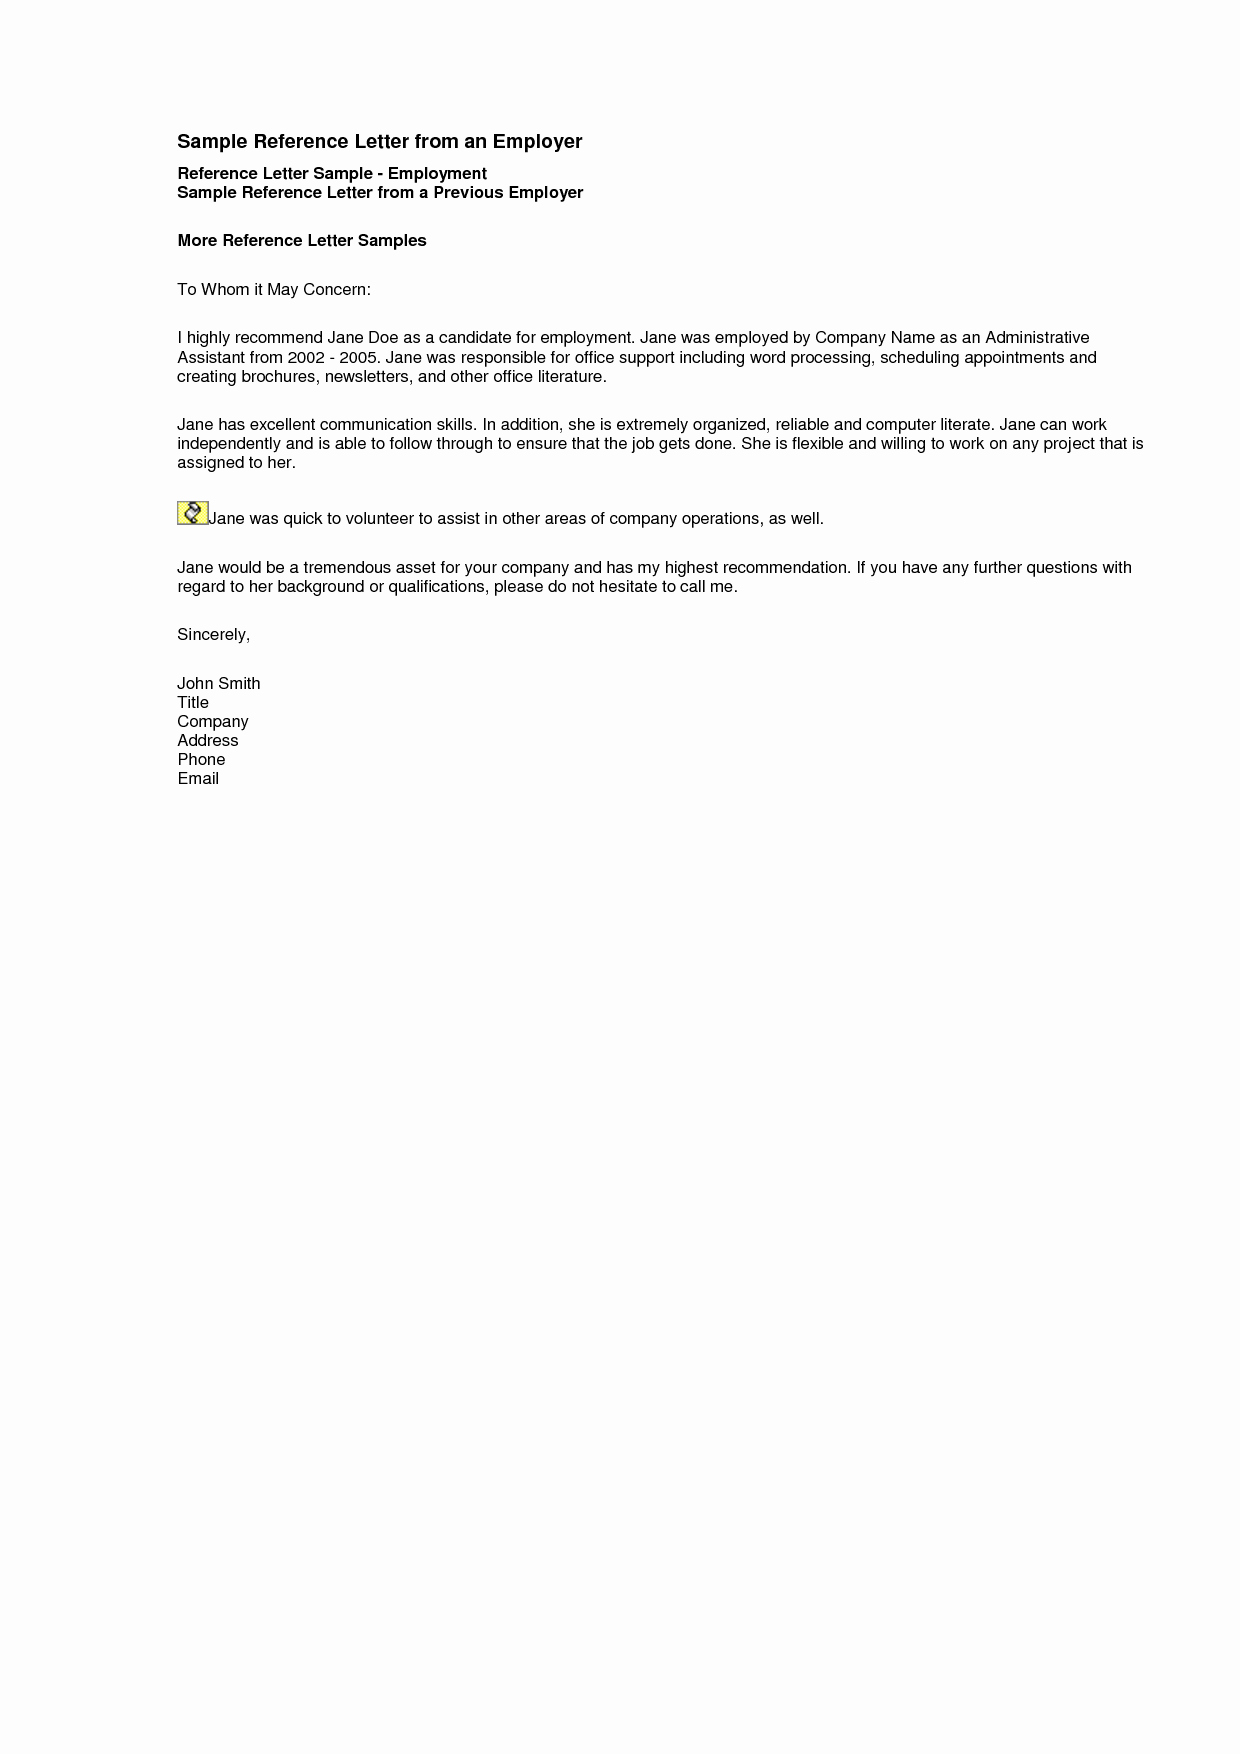 Letters Of Recommendation format Samples Unique Sample Professional Reference Letter